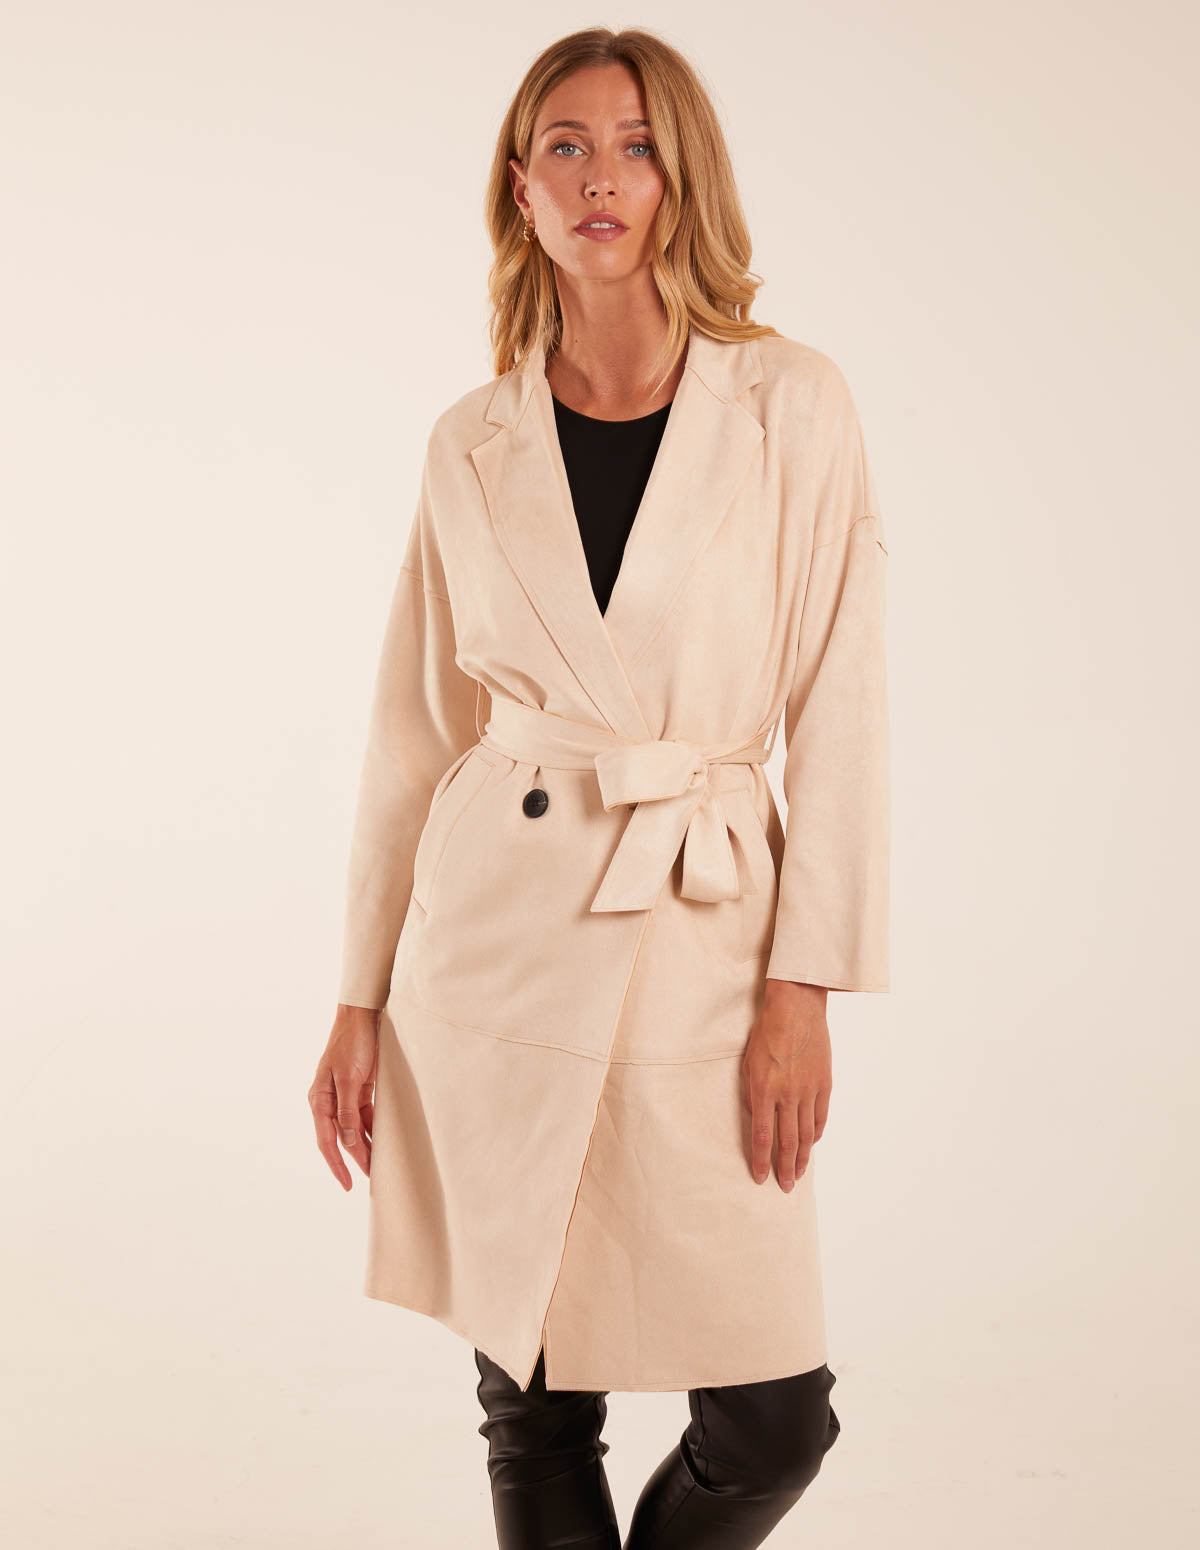 Waist Detail Trench Style Jacket - M / STONE